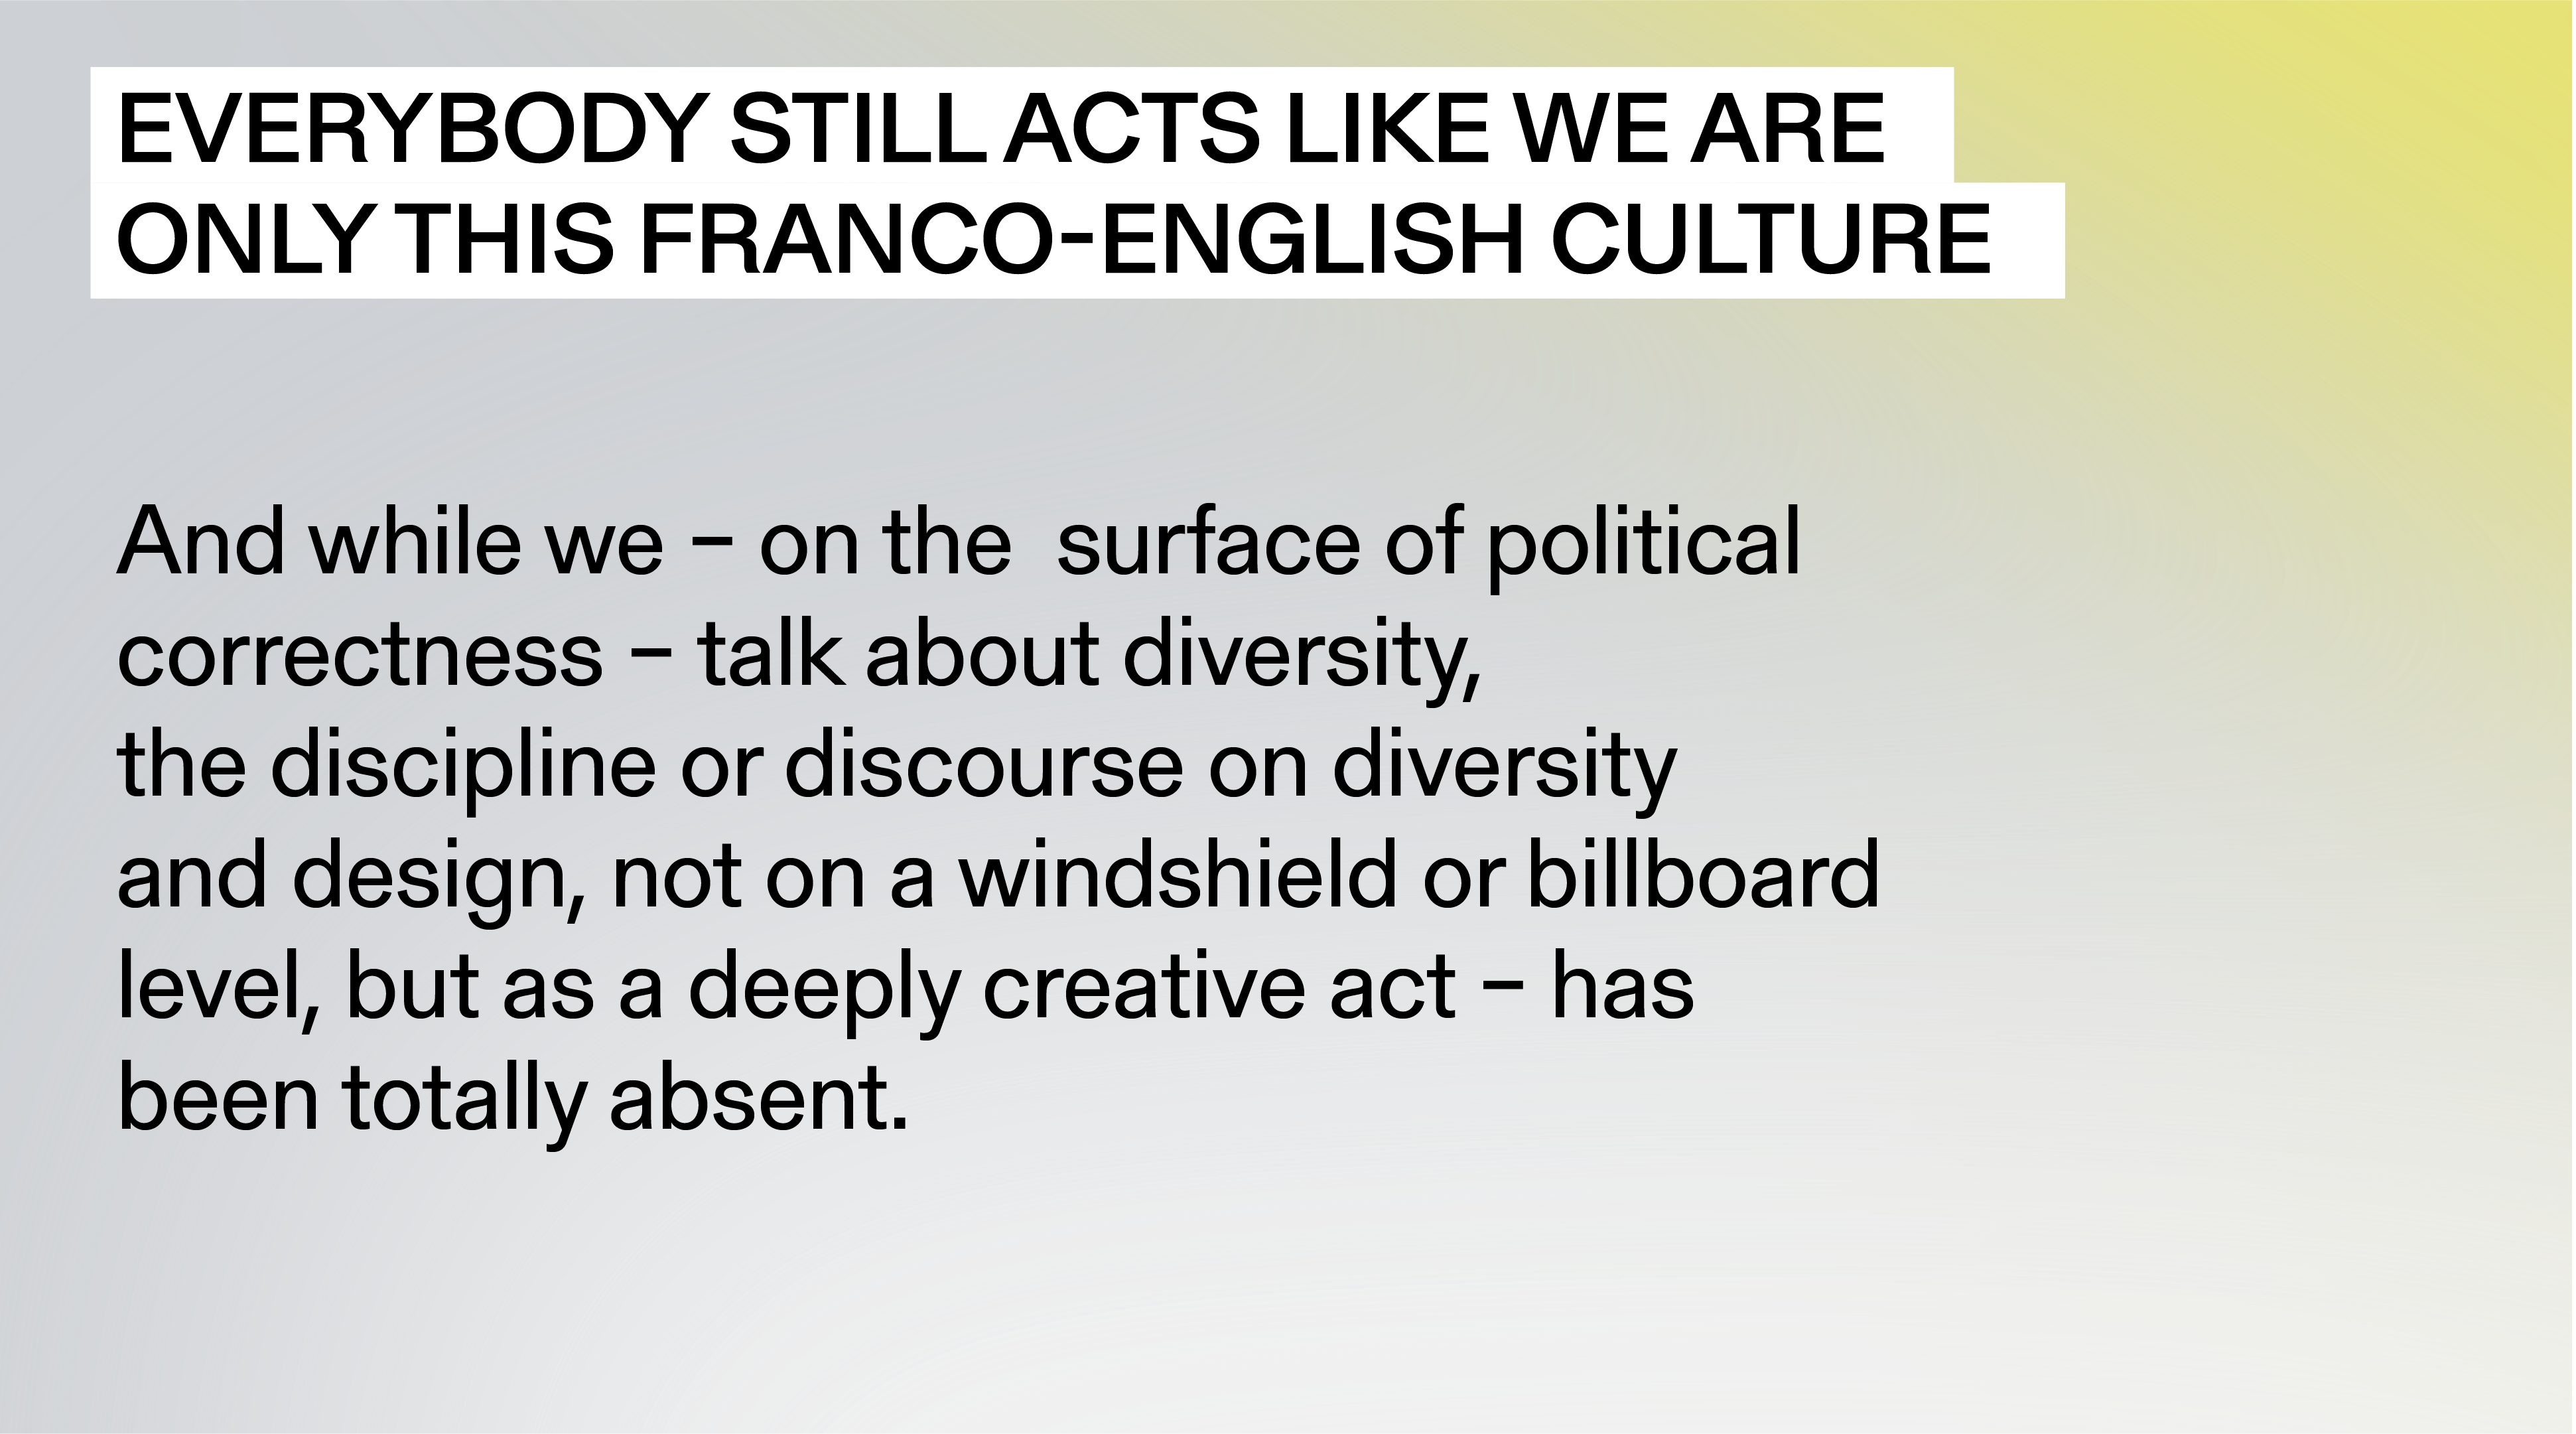  “Everybody still acts like we are only this Franco-English culture, and while we - on the  surface of political correctness - talk about diversity, the discipline or discourse on diversity and design, not on a windshield or billboard level, but as a deeply creative act - has been totally absent.”